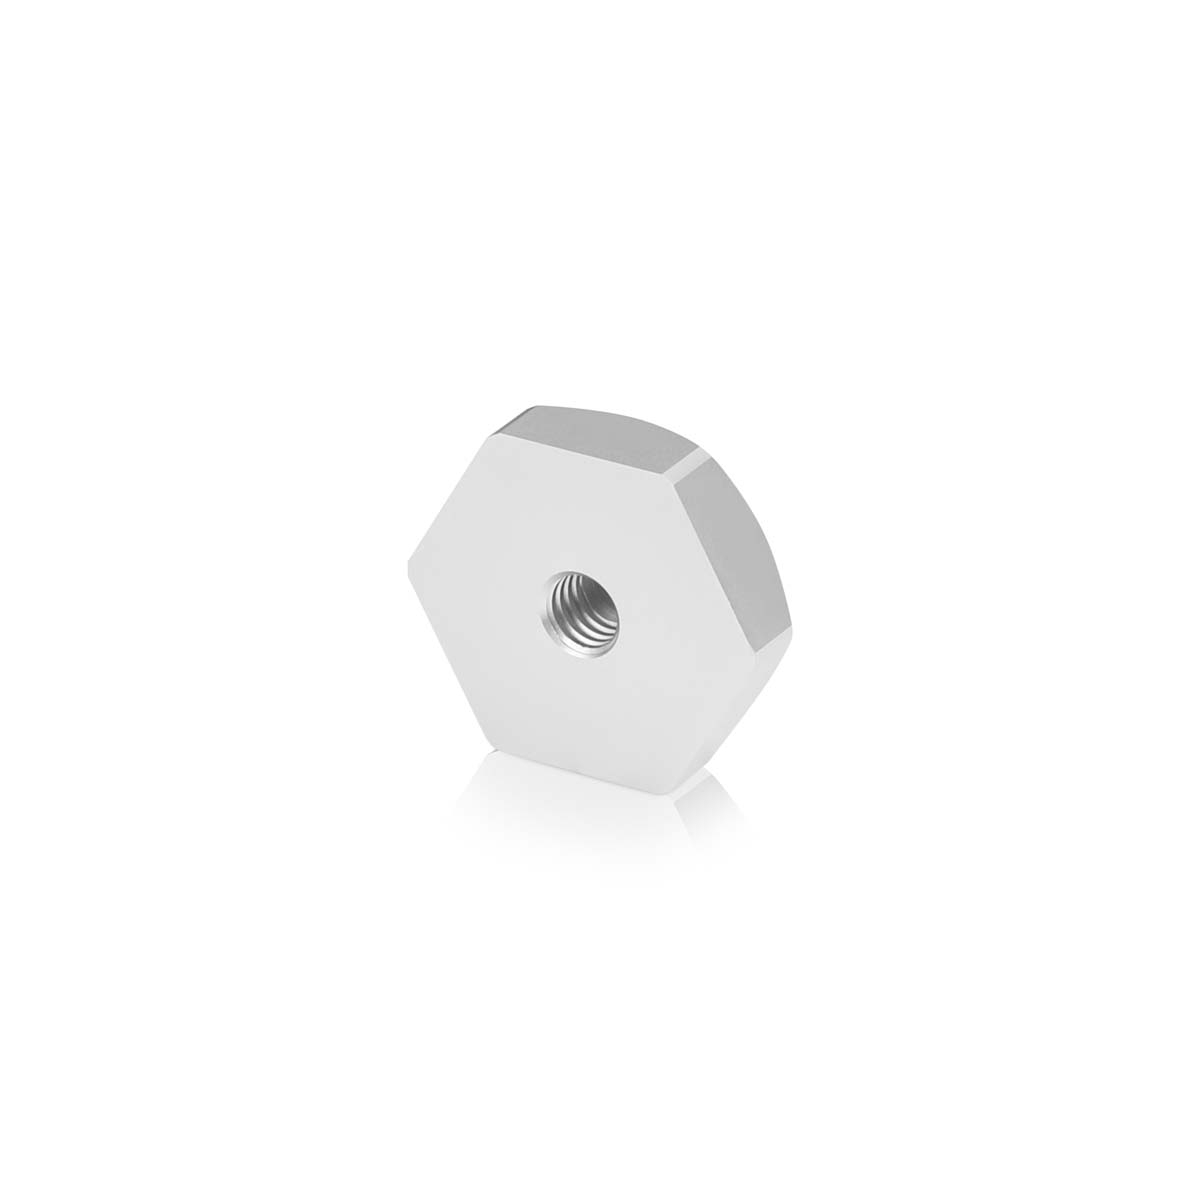 5/16-18 Threaded Hex 1-1/4'' Caps, Height: 3/8'', Clear Anodized Aluminum [Required Material Hole Size: 3/8'']